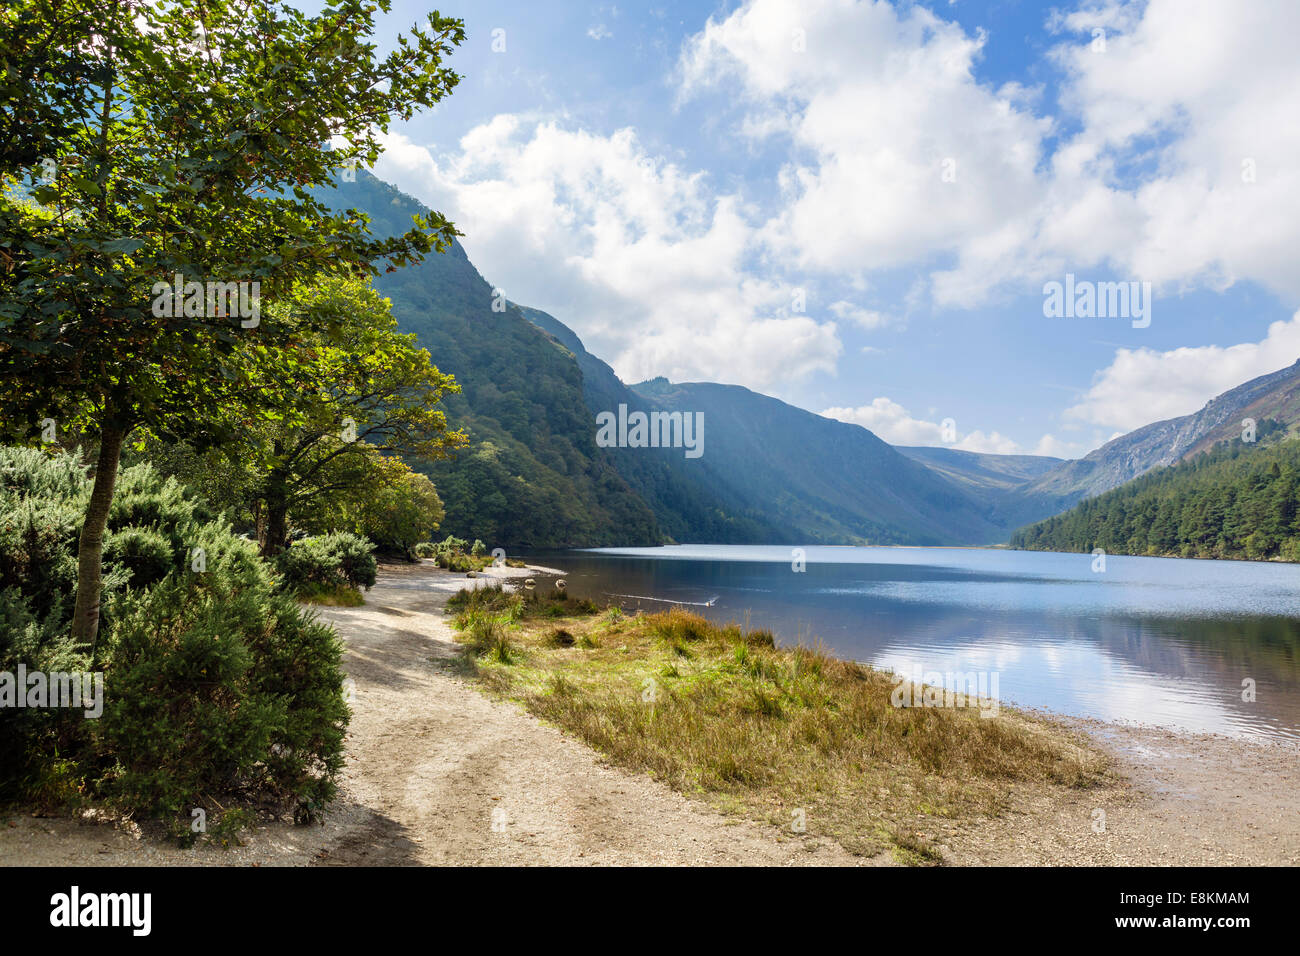 The Upper Lake at the old monastic settlement of Glendalough, County Wicklow, Republic of Ireland Stock Photo